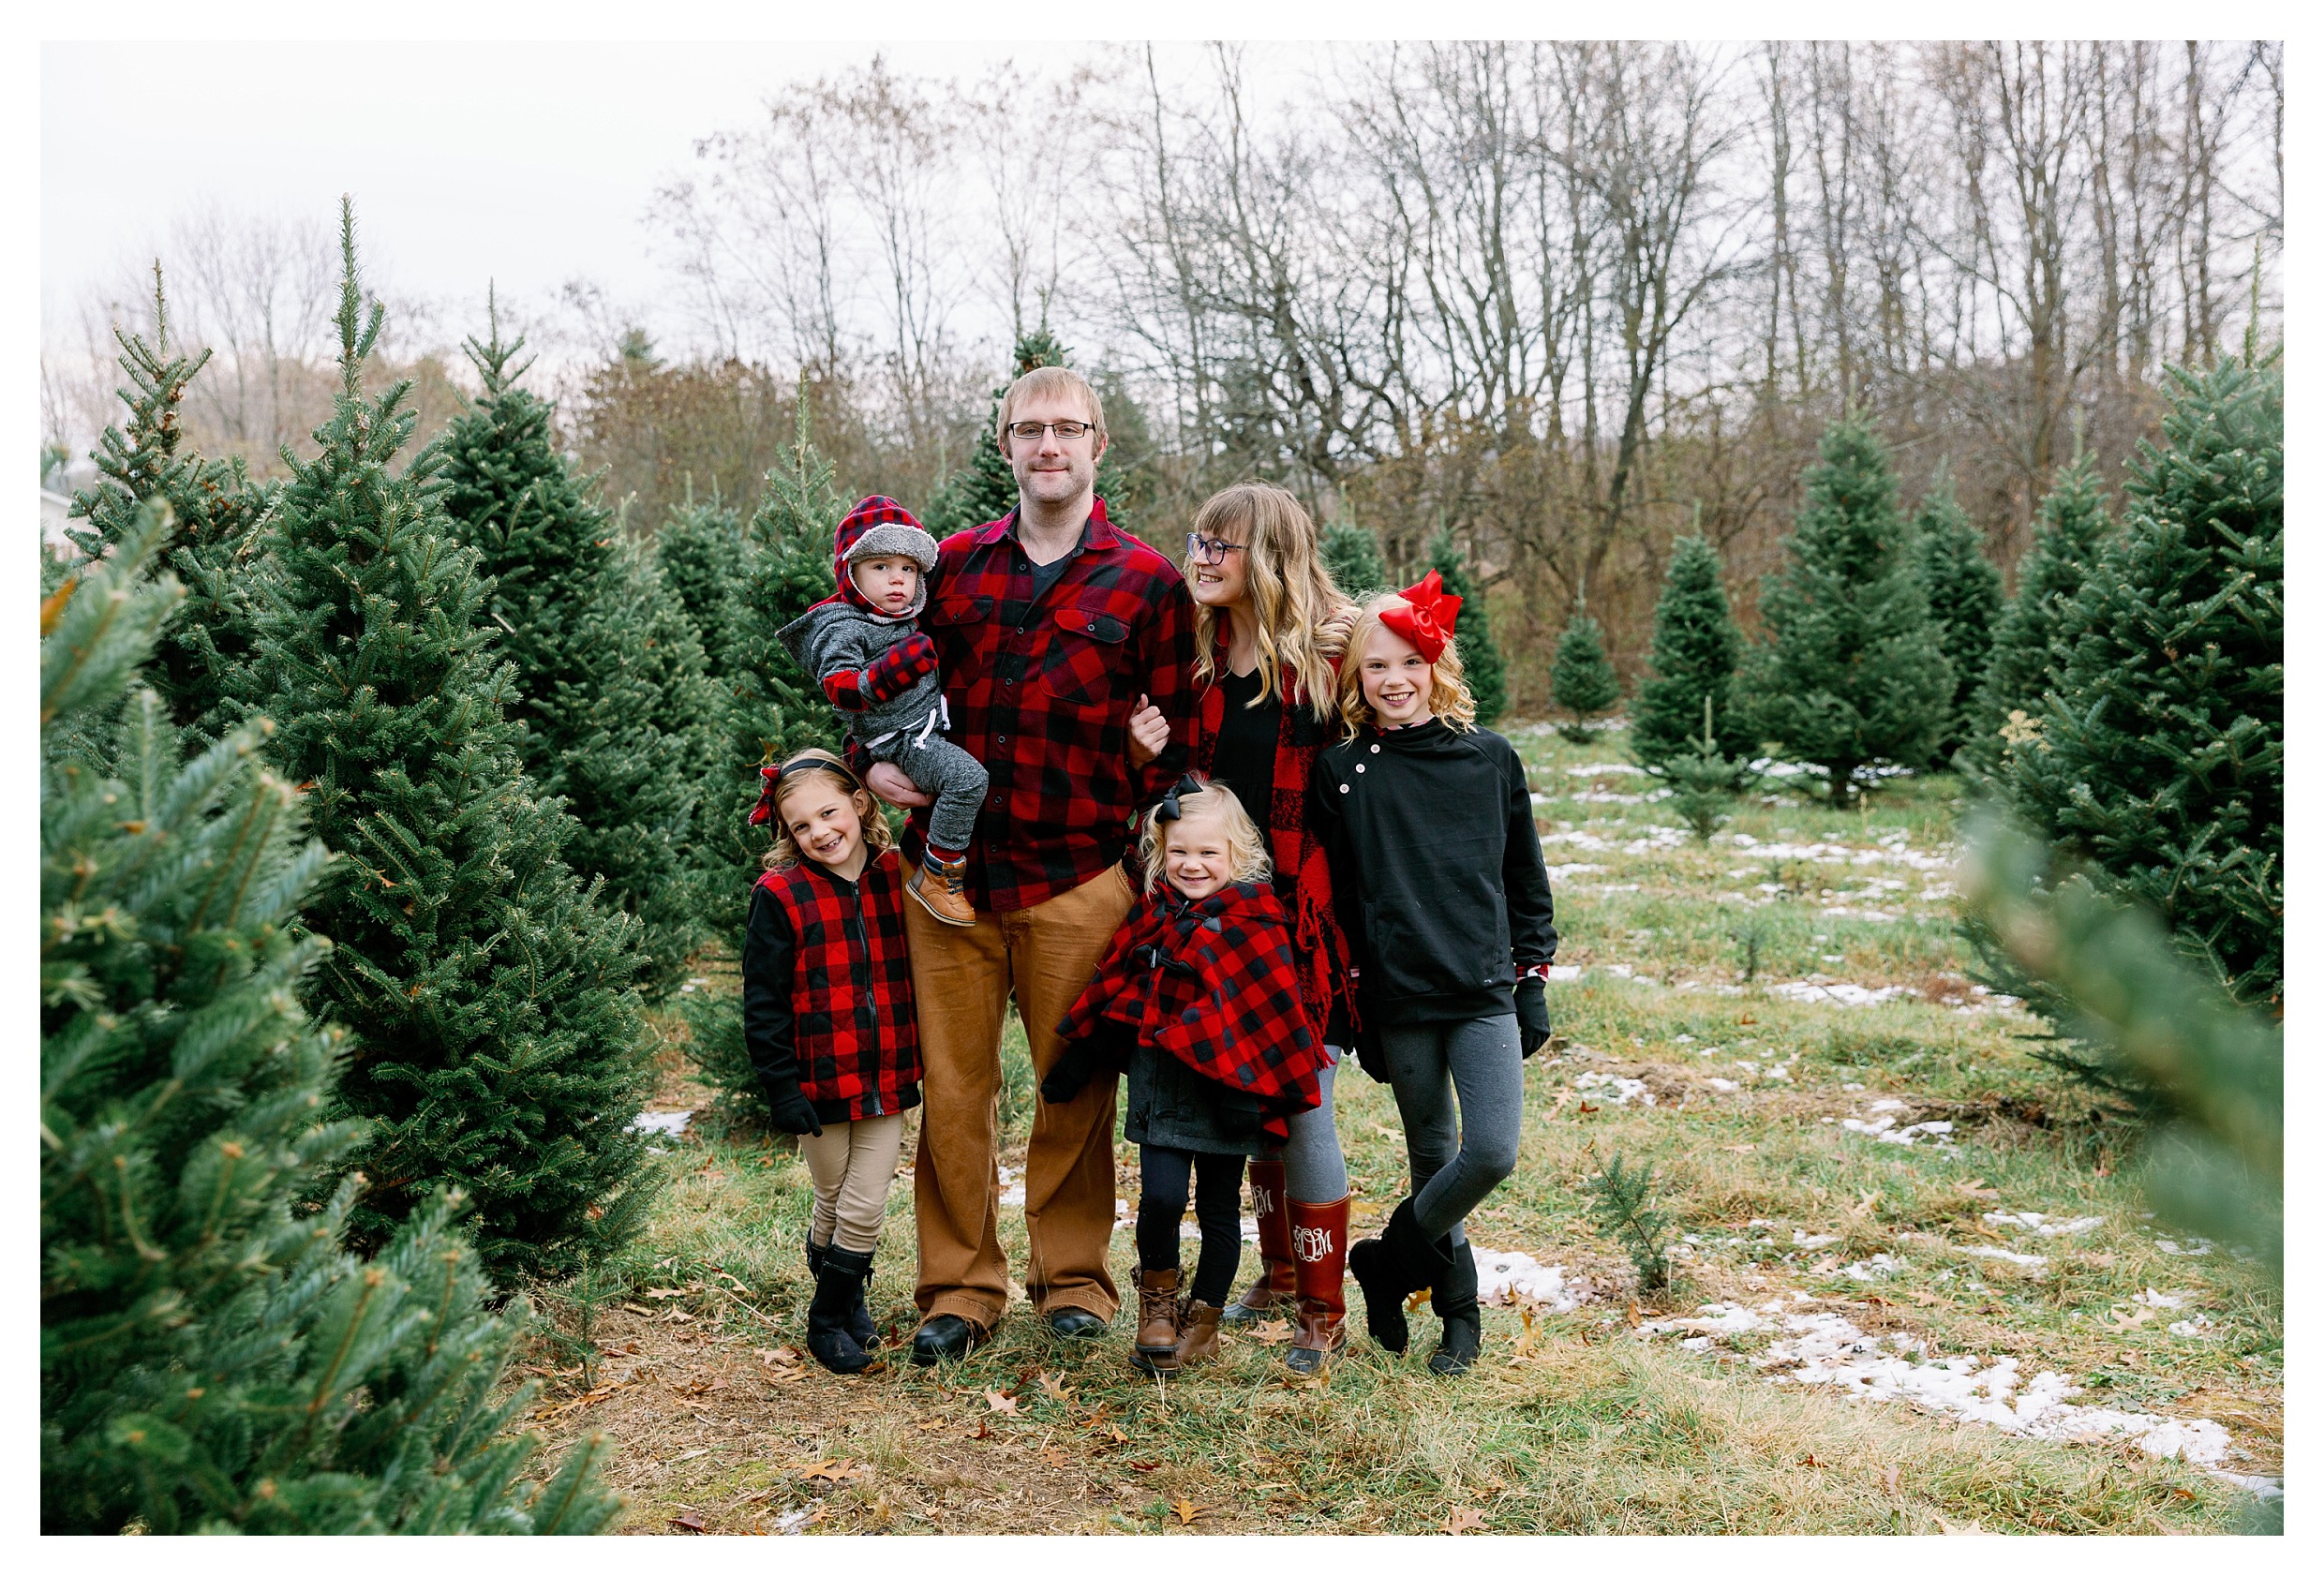 Wausau tree farm session with children